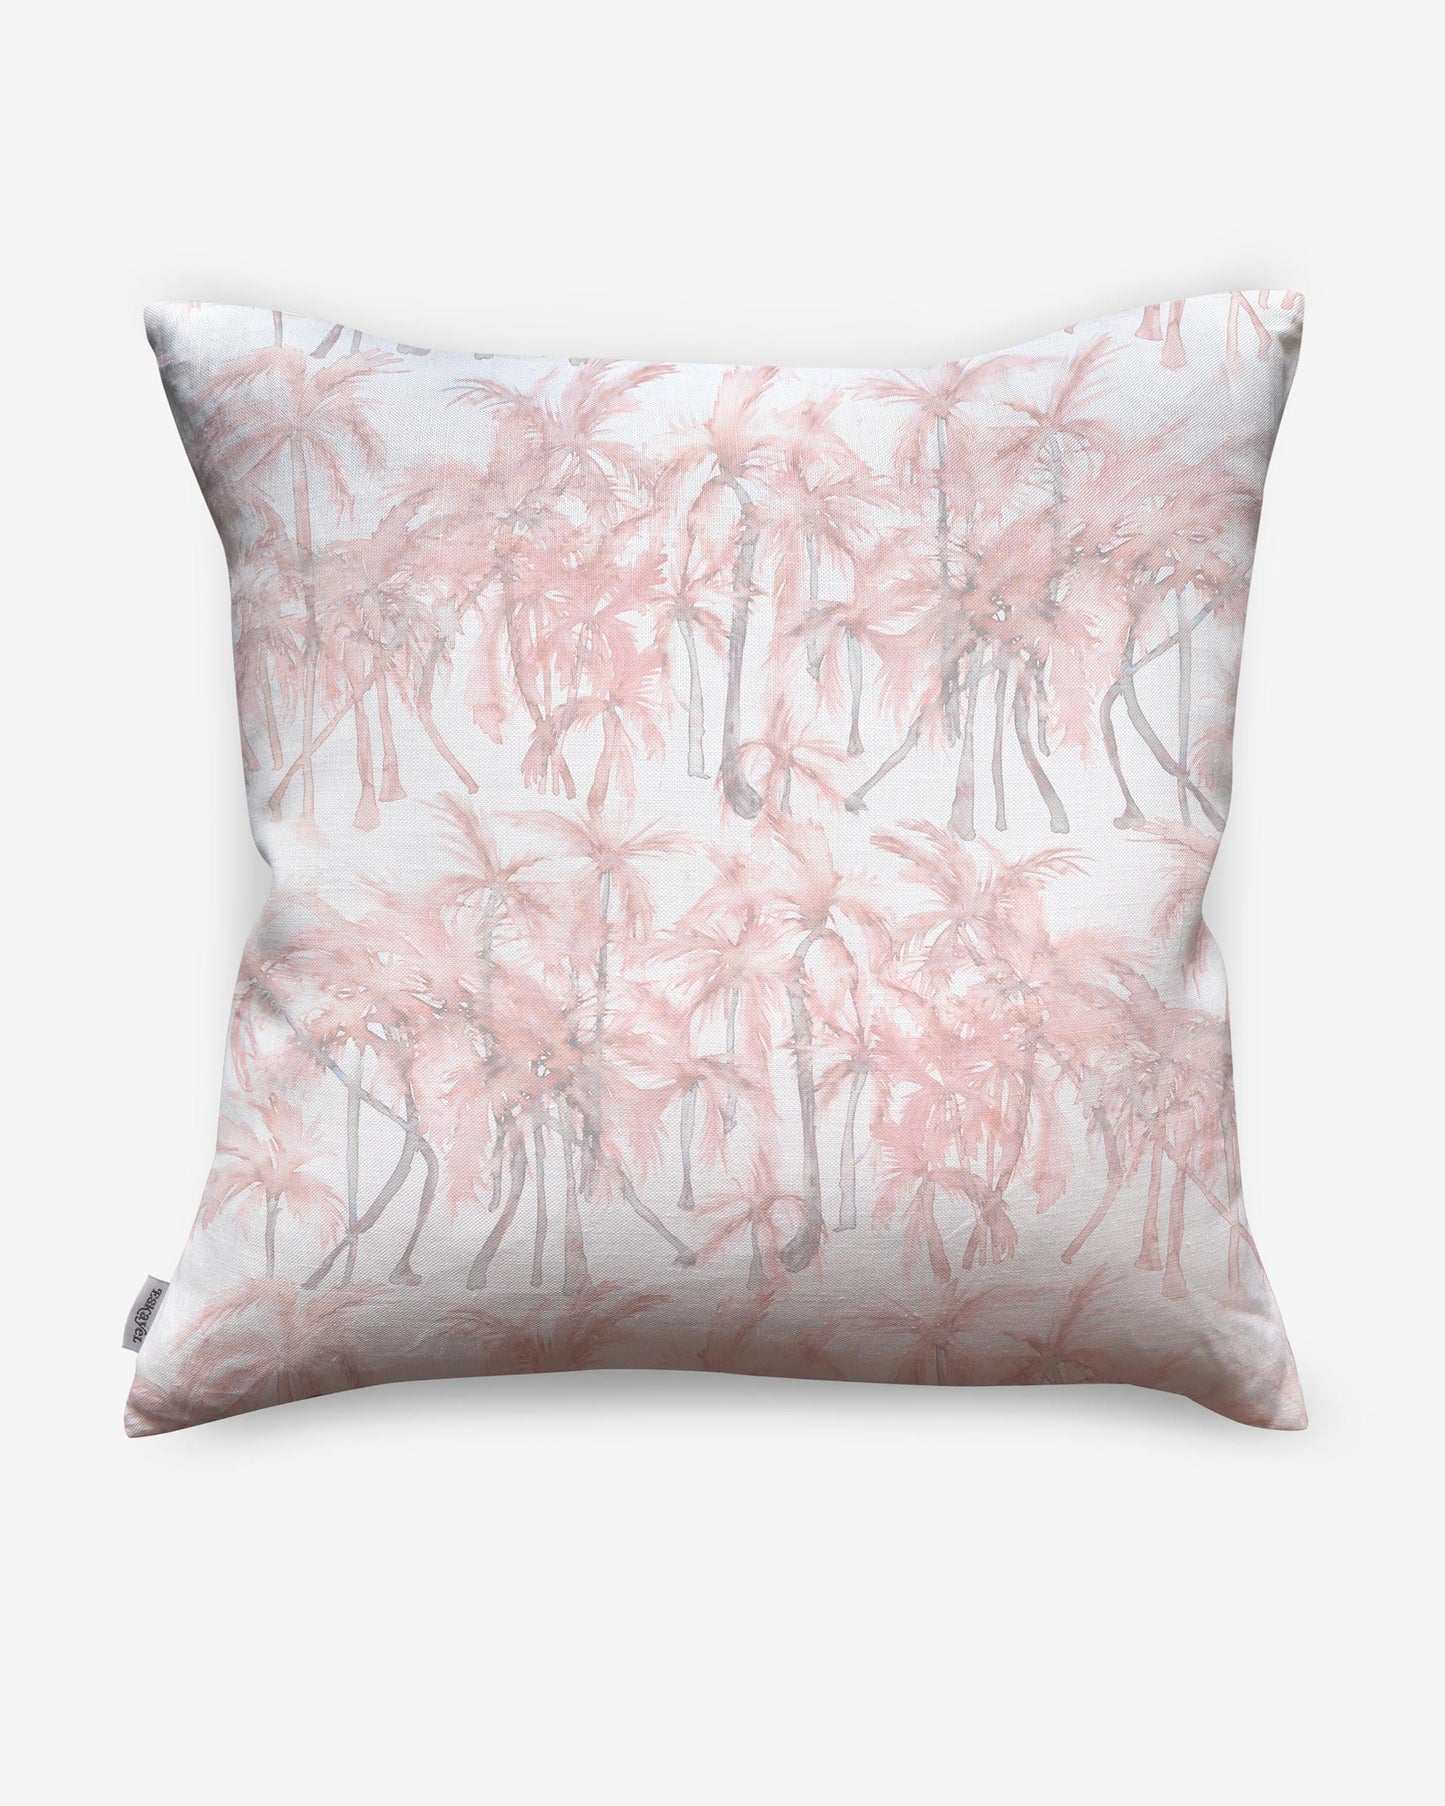 A pink and white Palm Dance Pillow Coral with palm trees on it that features a watercolor pattern